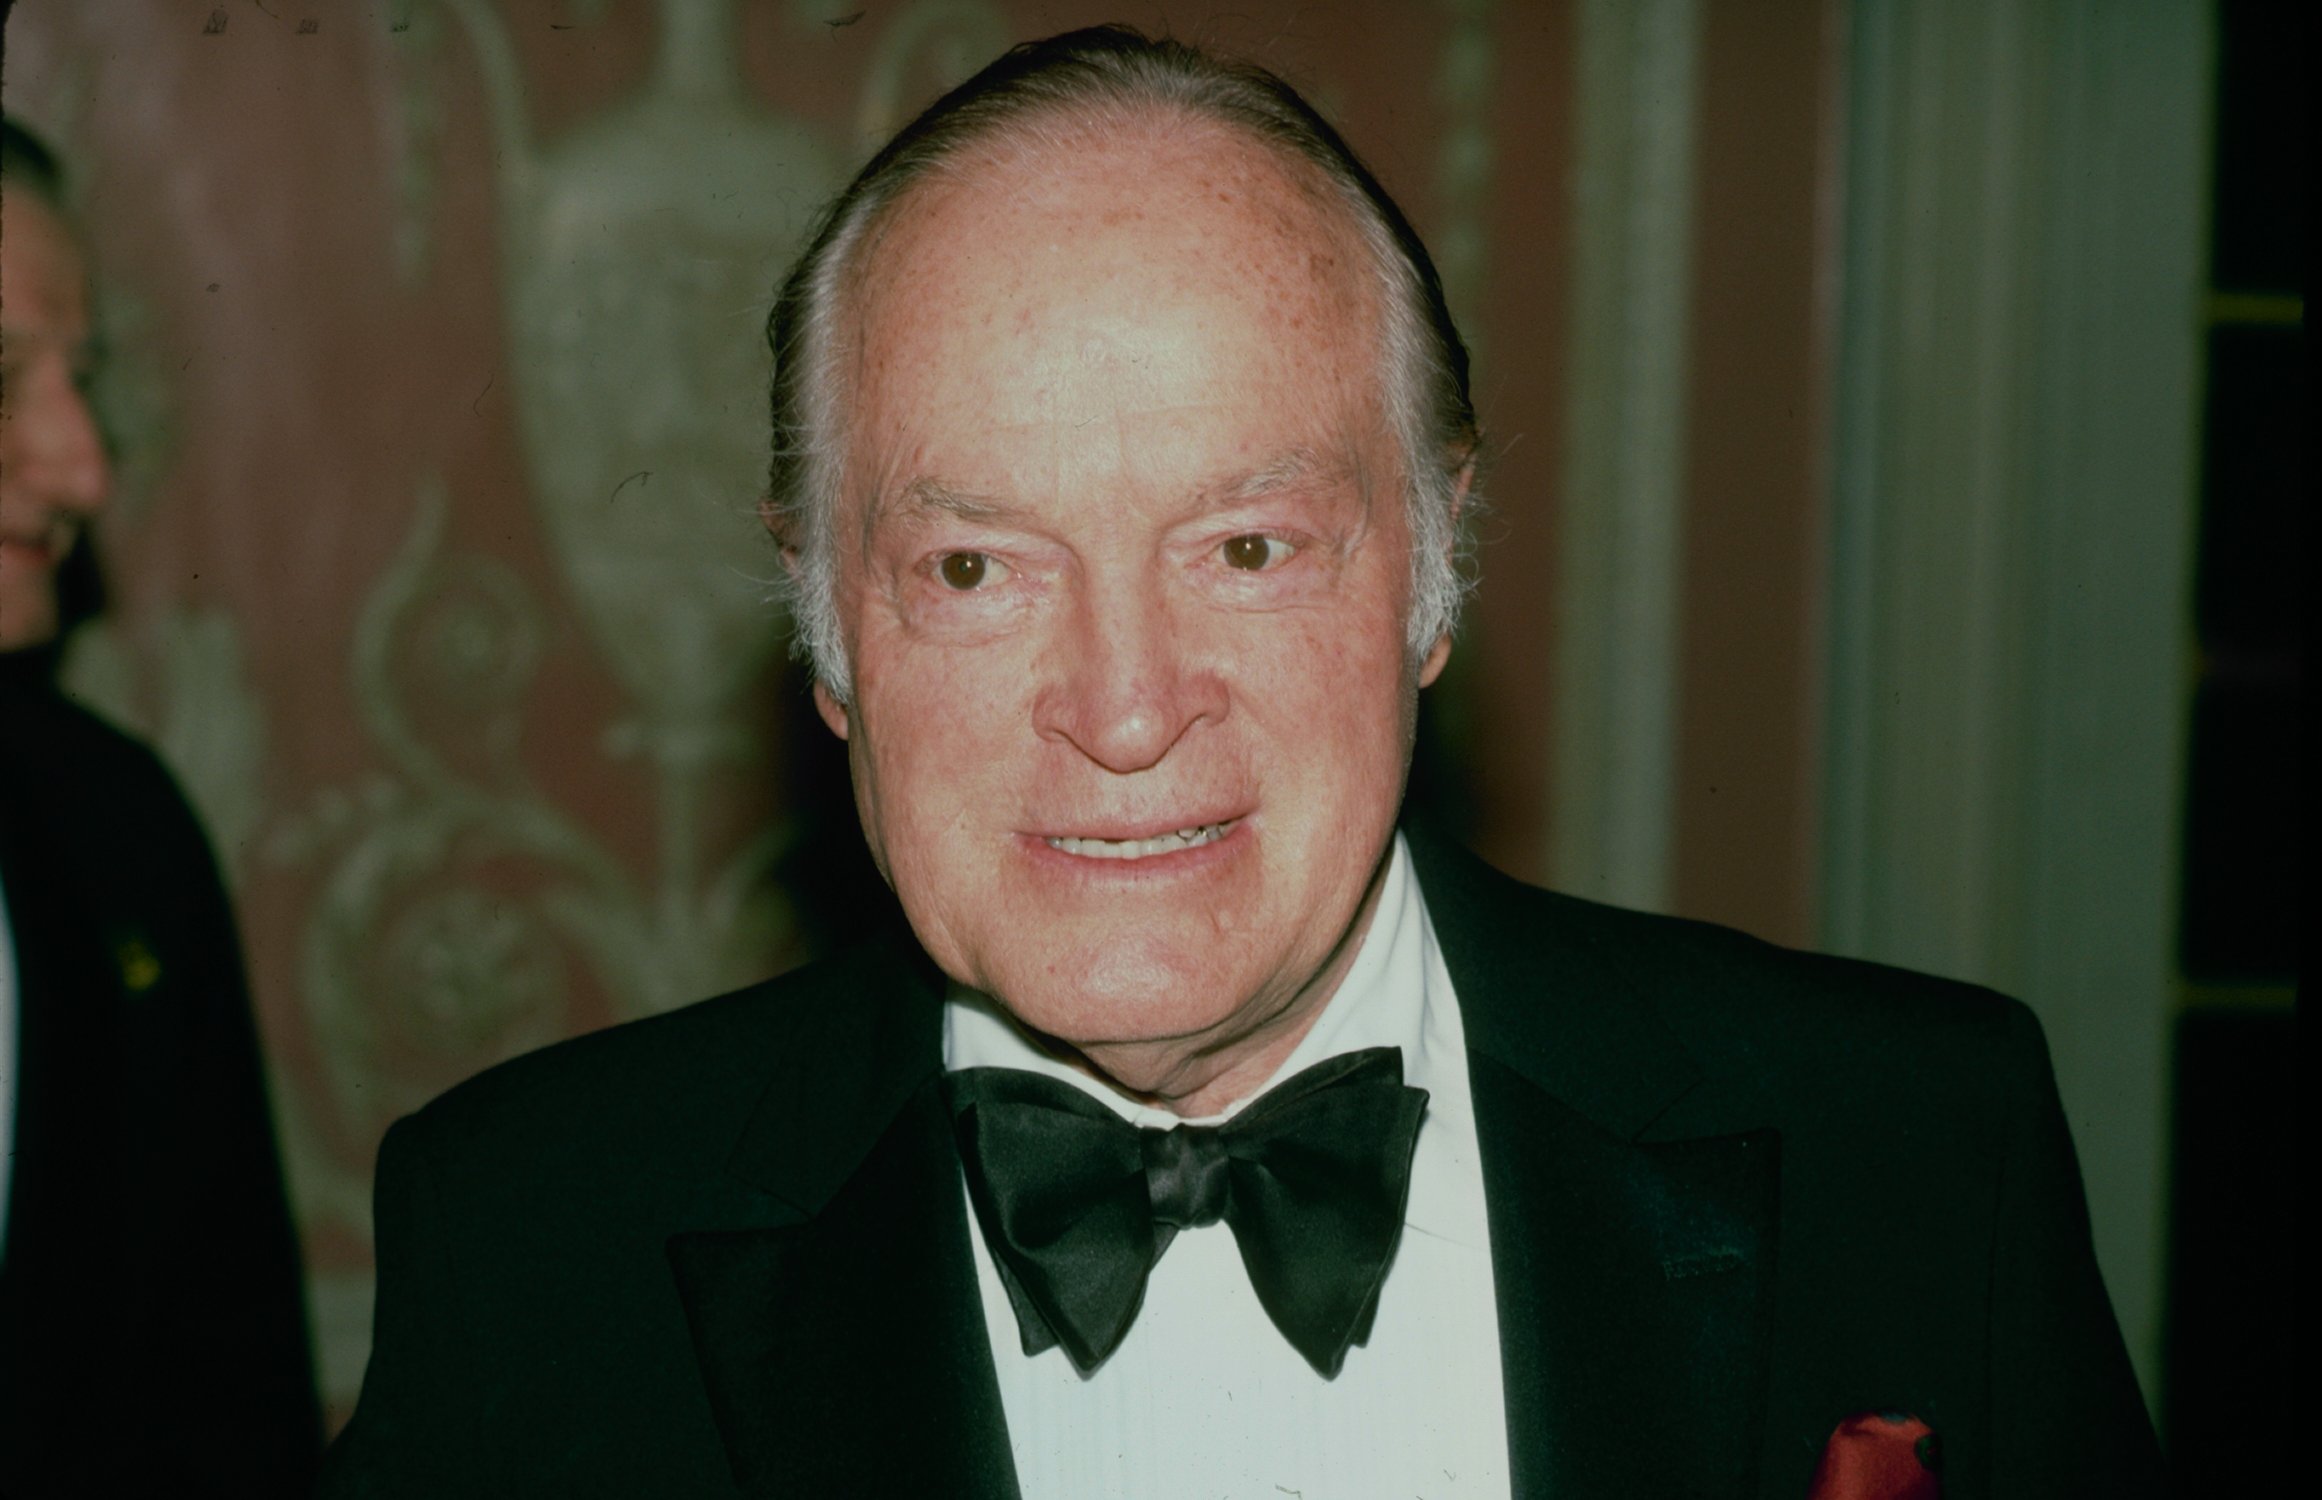 Bob Hope smiling looking to the right in front of a blurred background